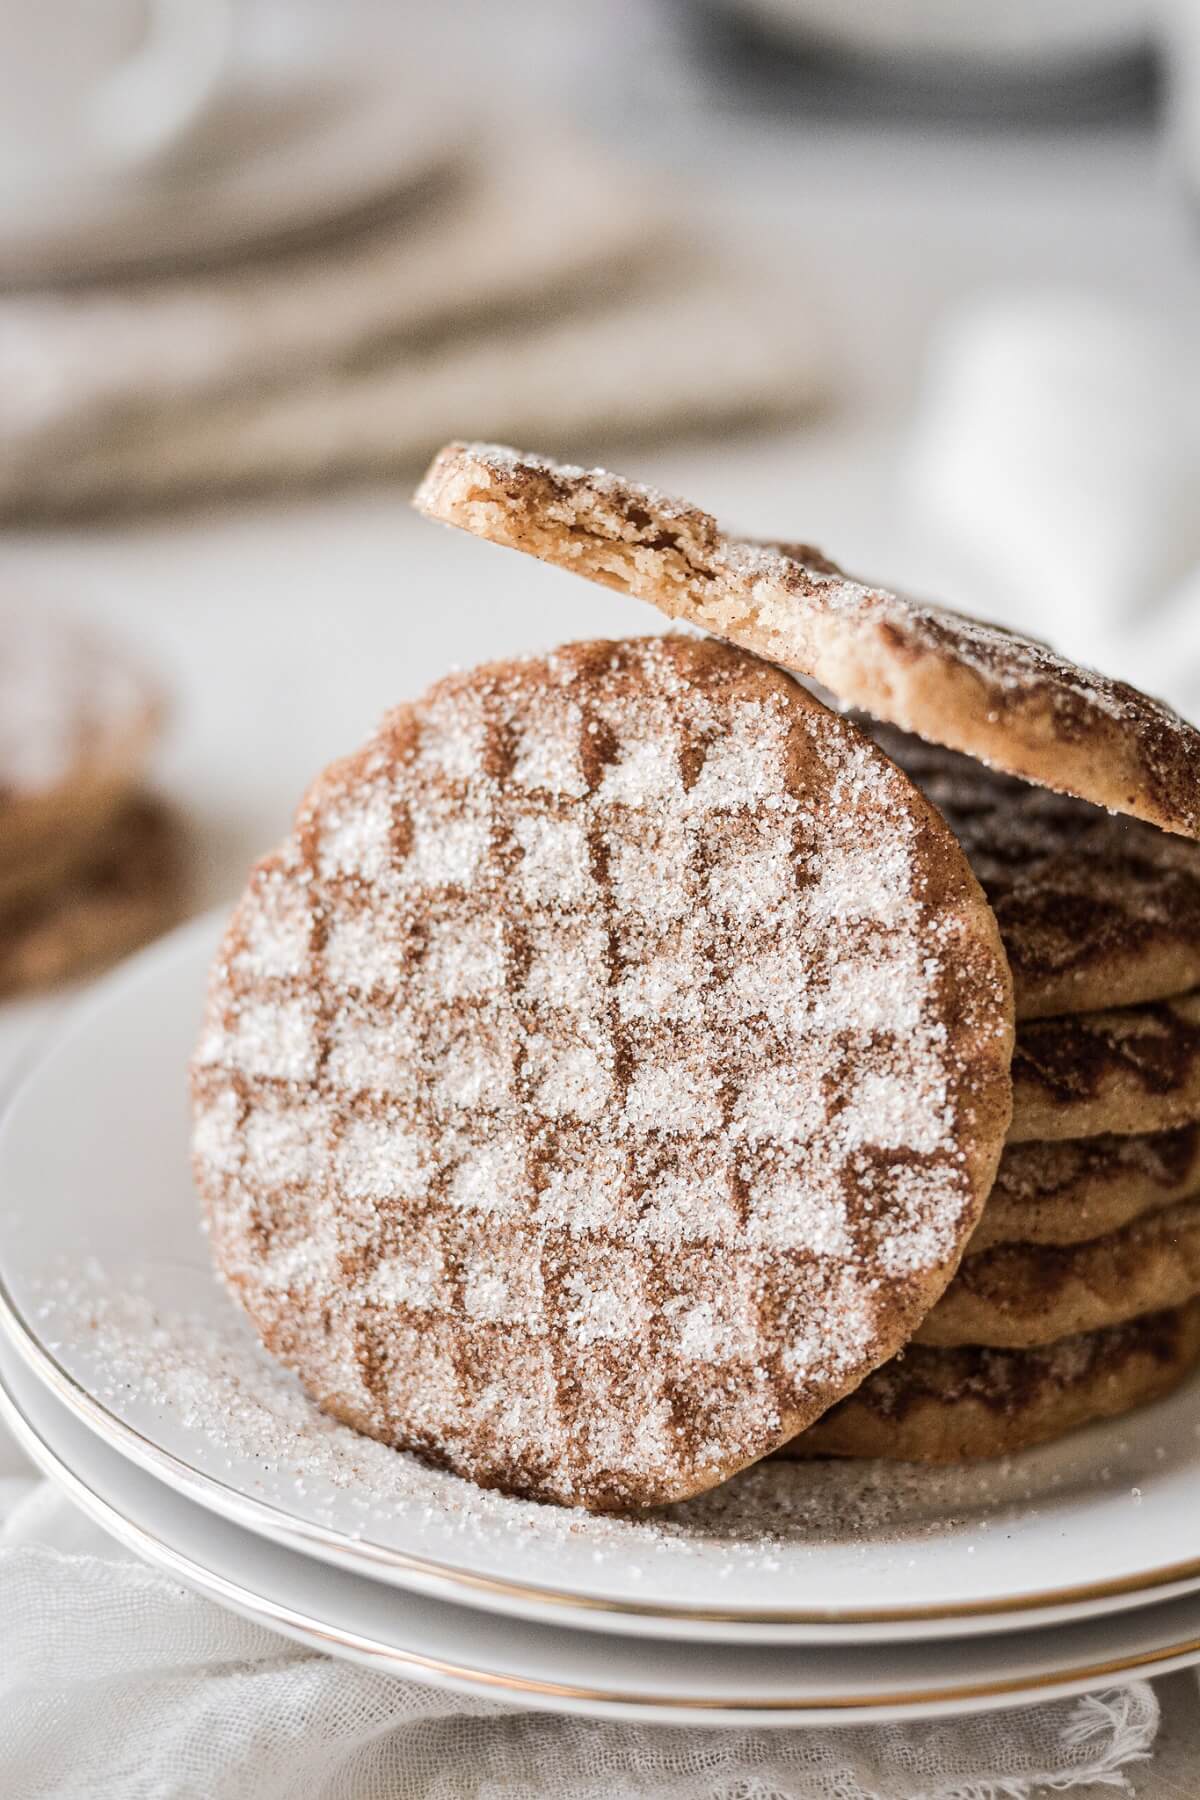 Snickerdoodle shortbread cookies with cinnamon sugar on a plate.